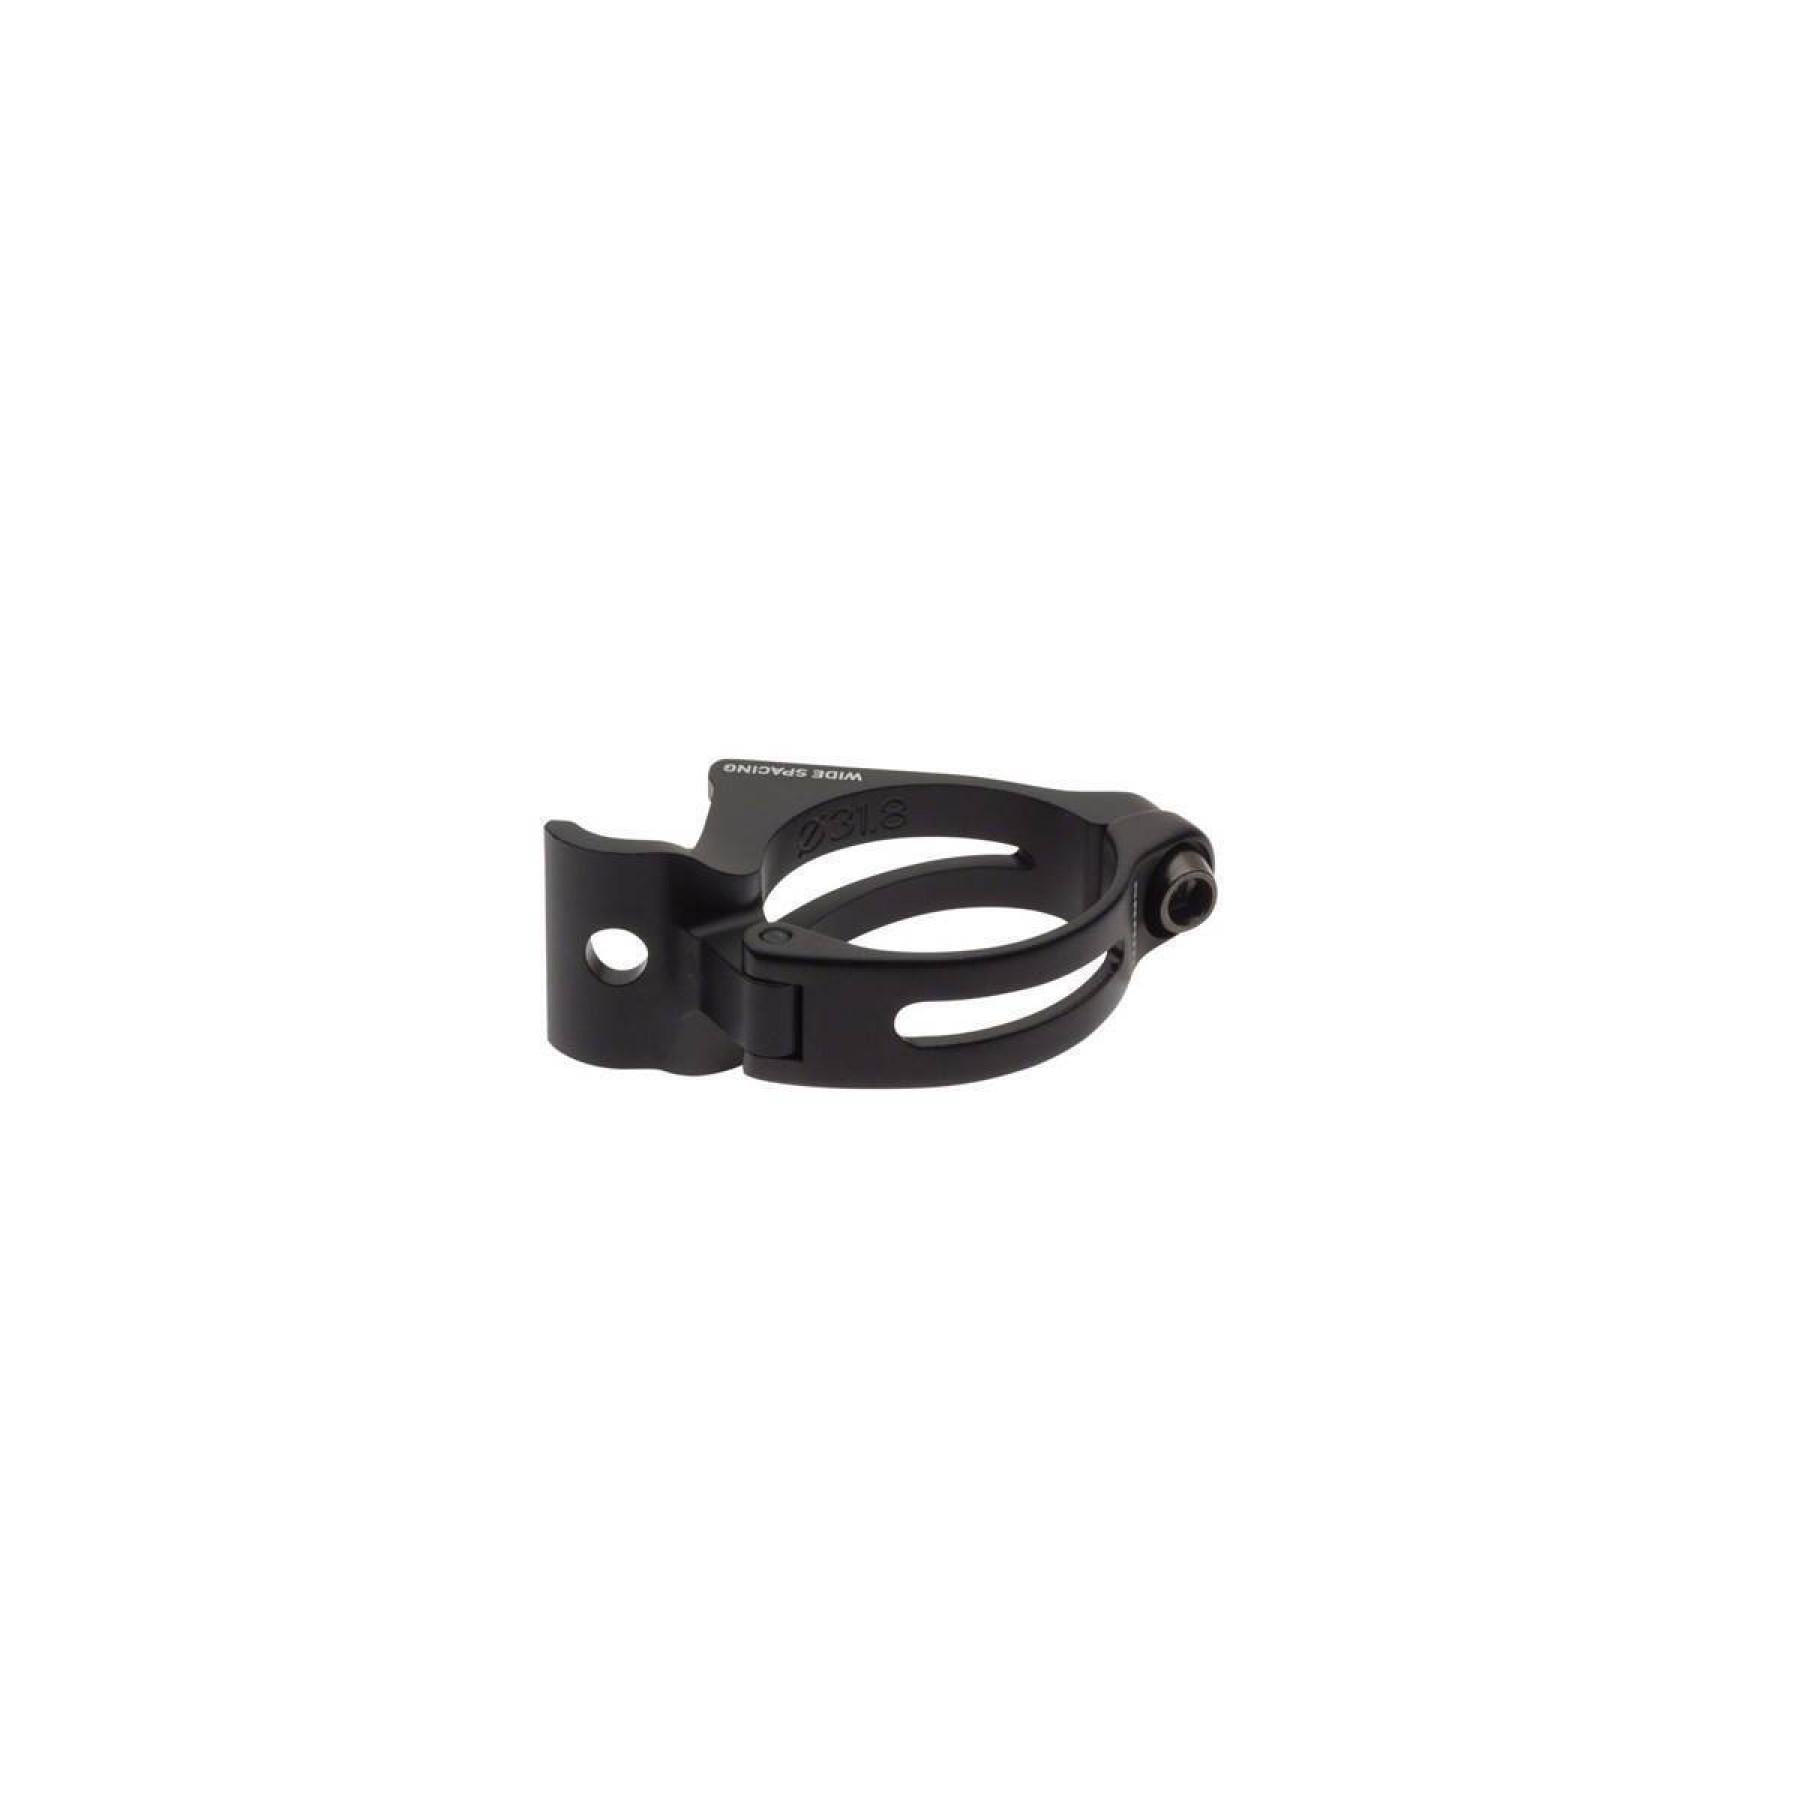 Descarrilador frontal Sram Red Braze-On Adaptor With Chainspotter Blk